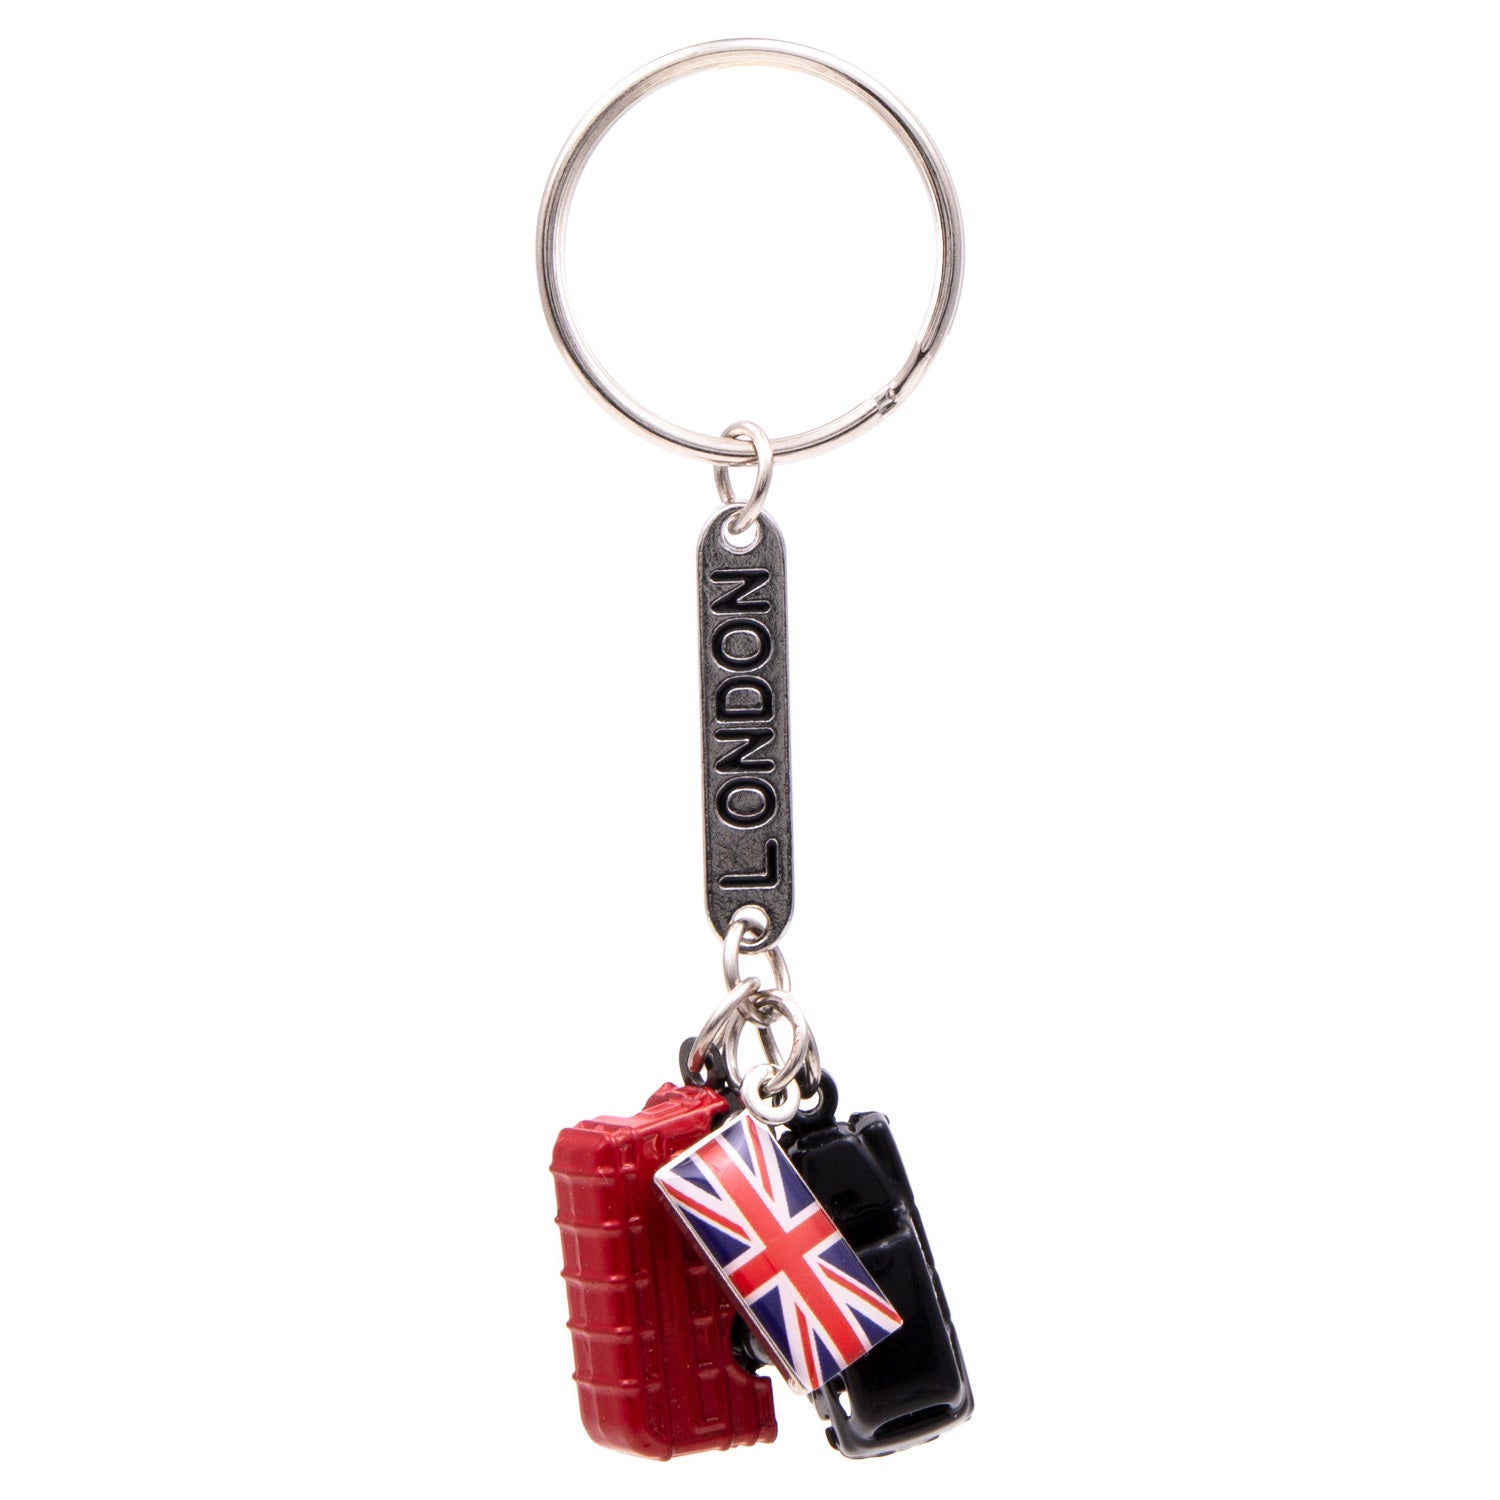 London Bus, Black Taxi and Union Jack Die Cast Keyring 2